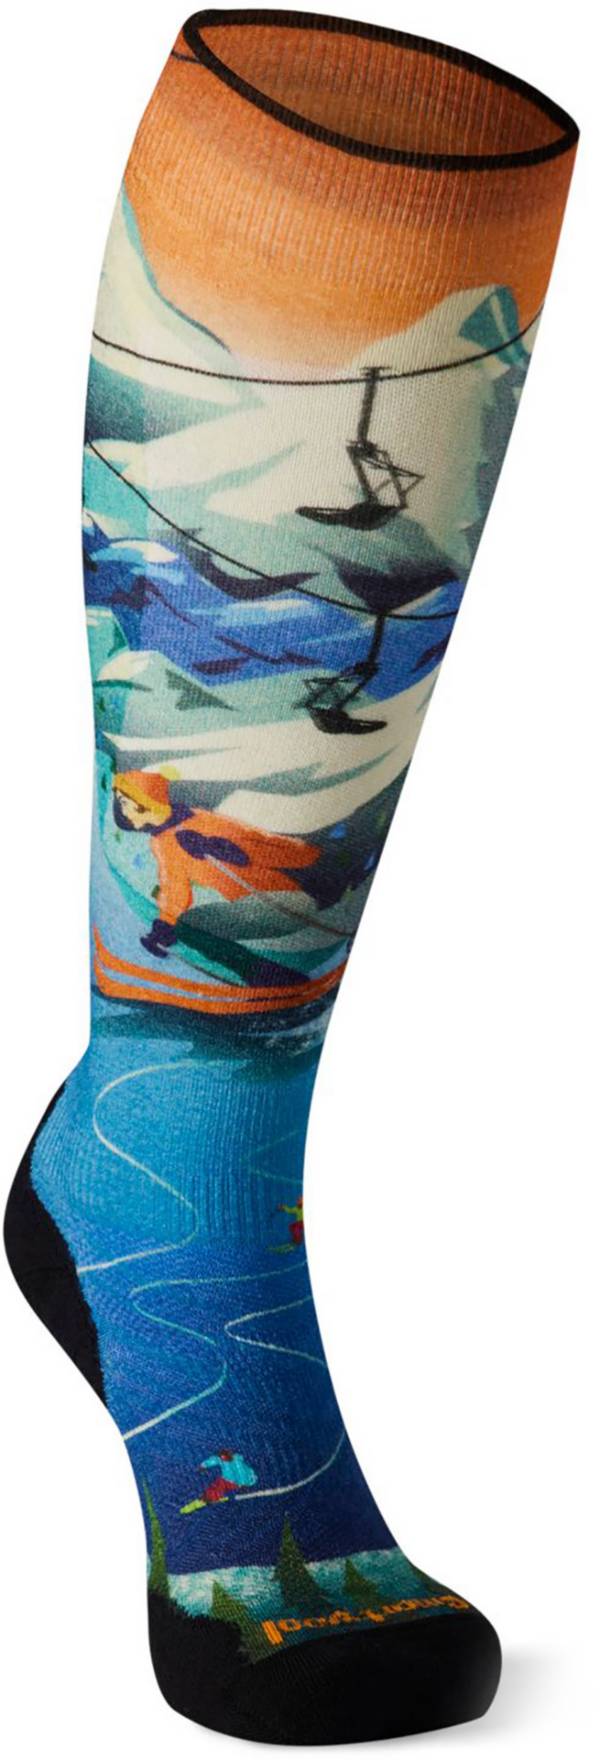 Smartwool Women's Ski Targeted Cushion Lift Bunny Over The Calf Socks product image